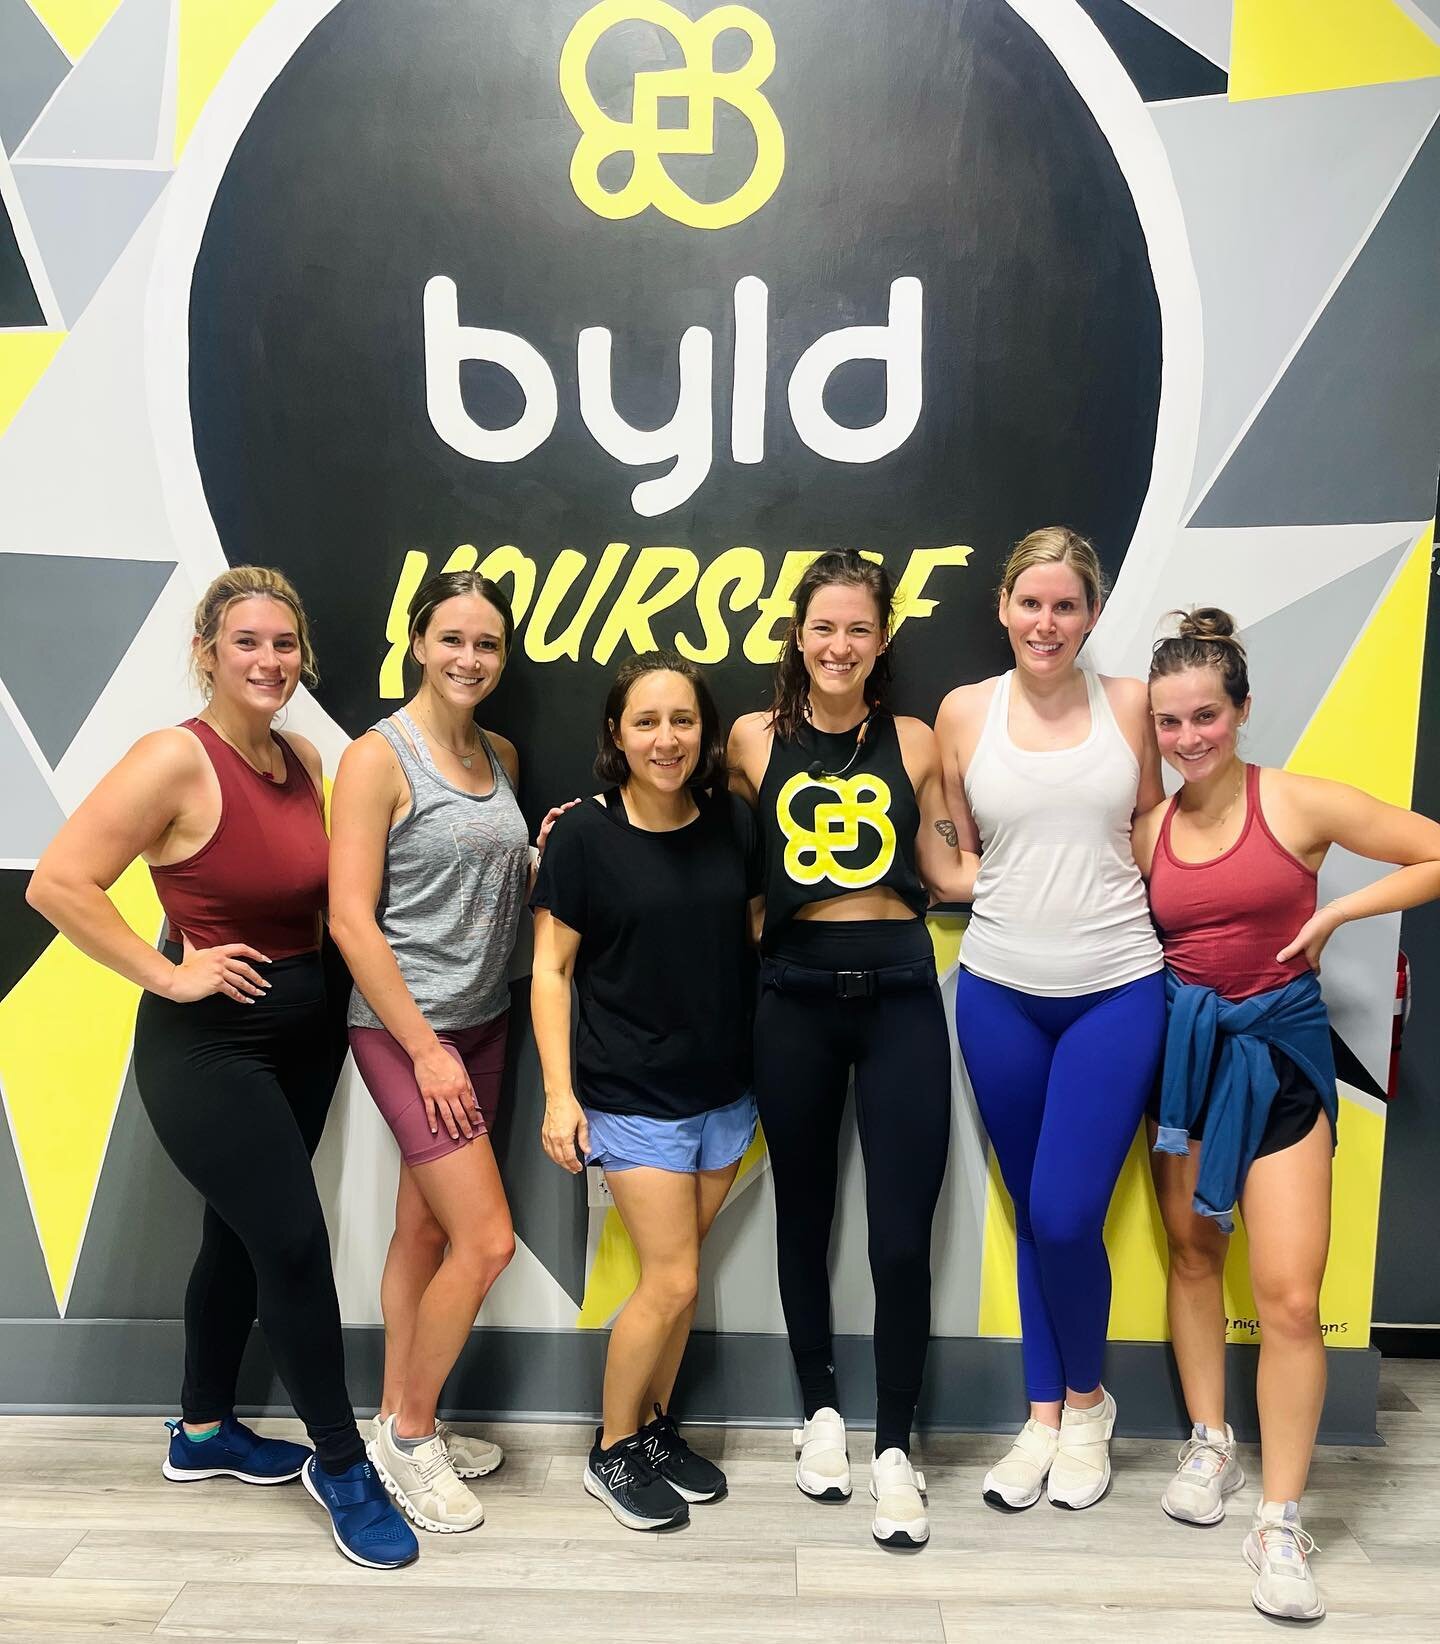 This group was up and at &lsquo;em at 5:30 AM w/ @allykbeard this morning! Got in a good sweat / workout before the sun came up 💪 Join them every Monday, Wednesday, and Friday! Awesome job, early risers! ☀️